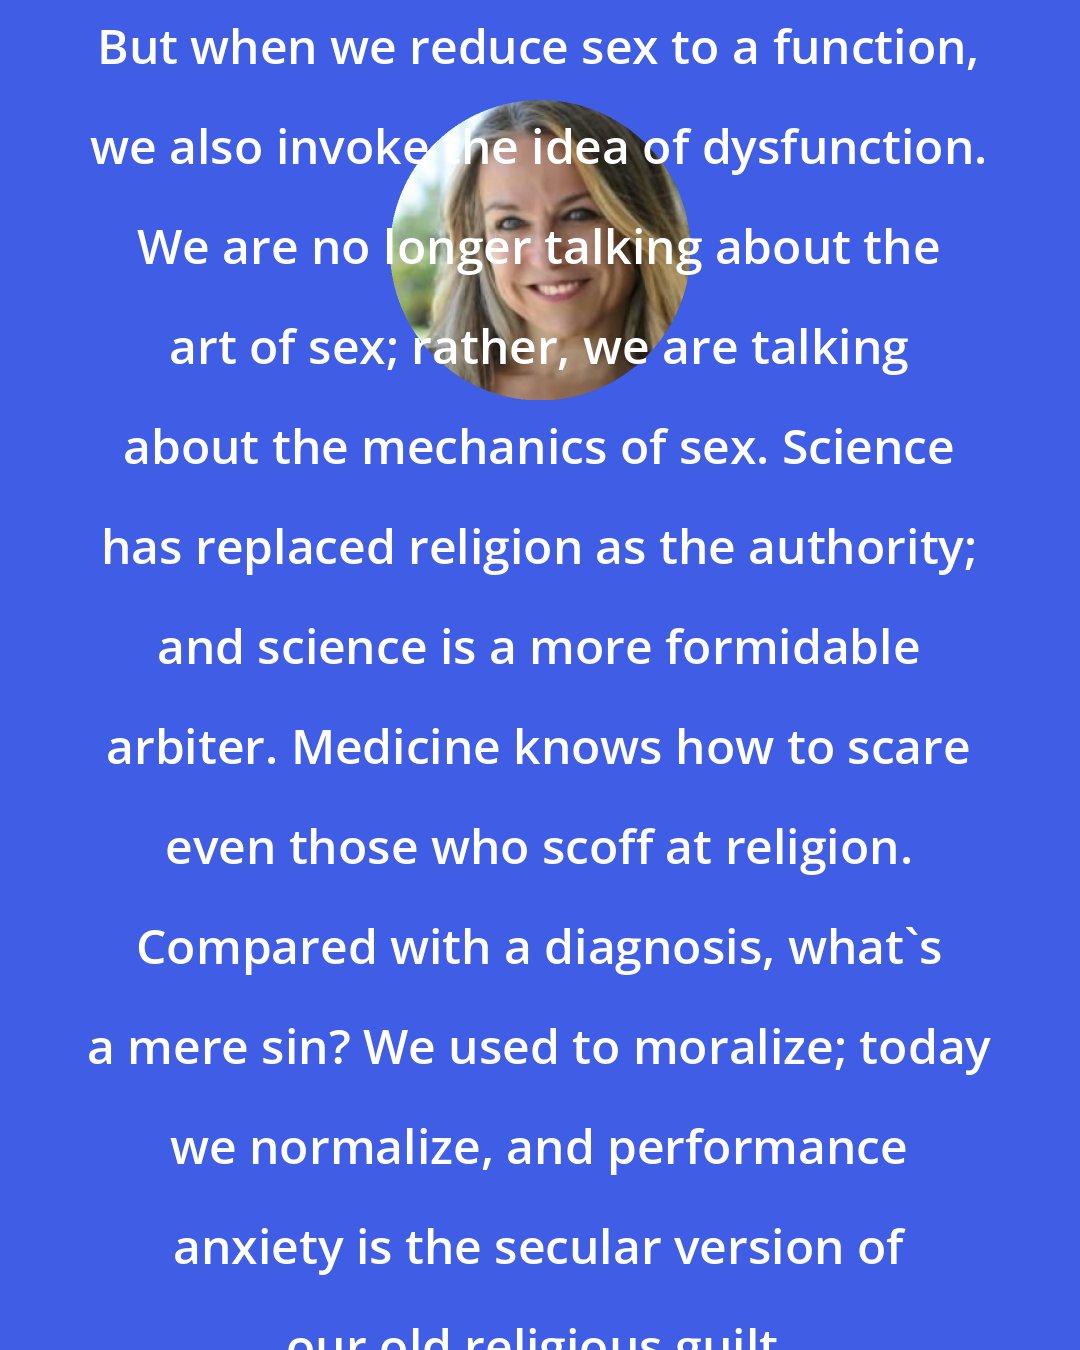 Esther Perel: But when we reduce sex to a function, we also invoke the idea of dysfunction. We are no longer talking about the art of sex; rather, we are talking about the mechanics of sex. Science has replaced religion as the authority; and science is a more formidable arbiter. Medicine knows how to scare even those who scoff at religion. Compared with a diagnosis, what's a mere sin? We used to moralize; today we normalize, and performance anxiety is the secular version of our old religious guilt.